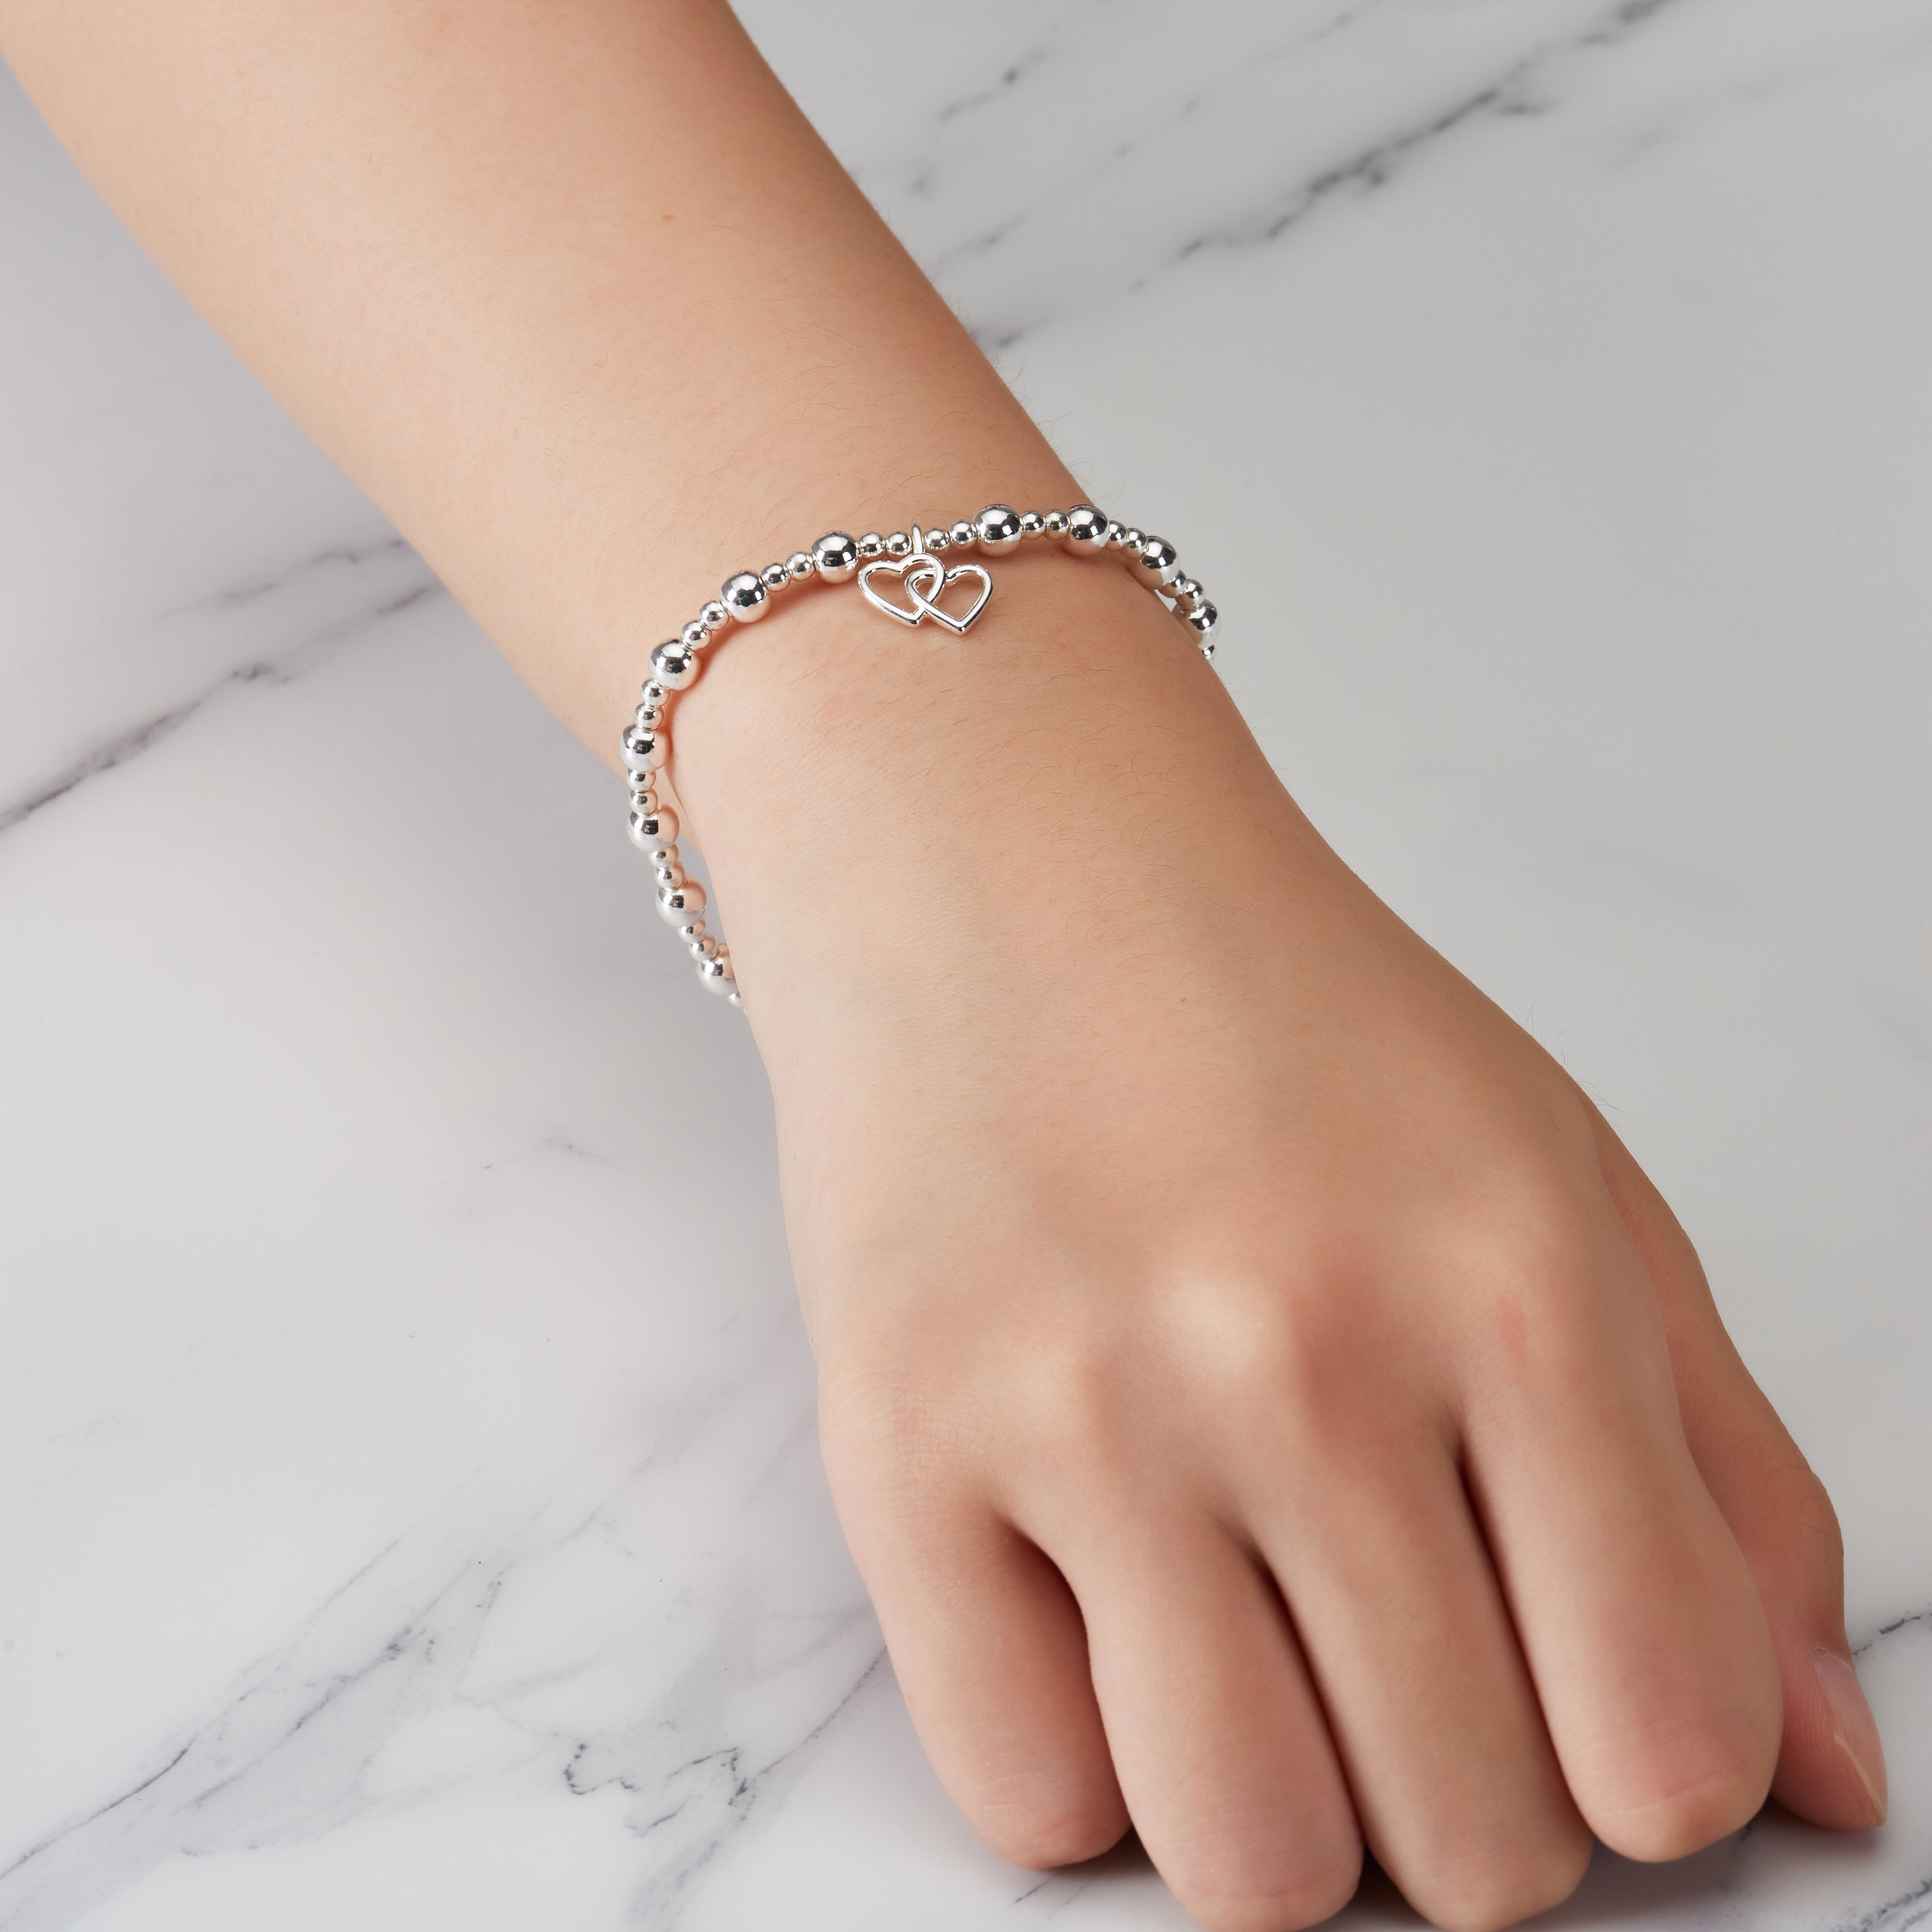 Silver Plated Sister Quote Stretch Bracelet with Gift Box